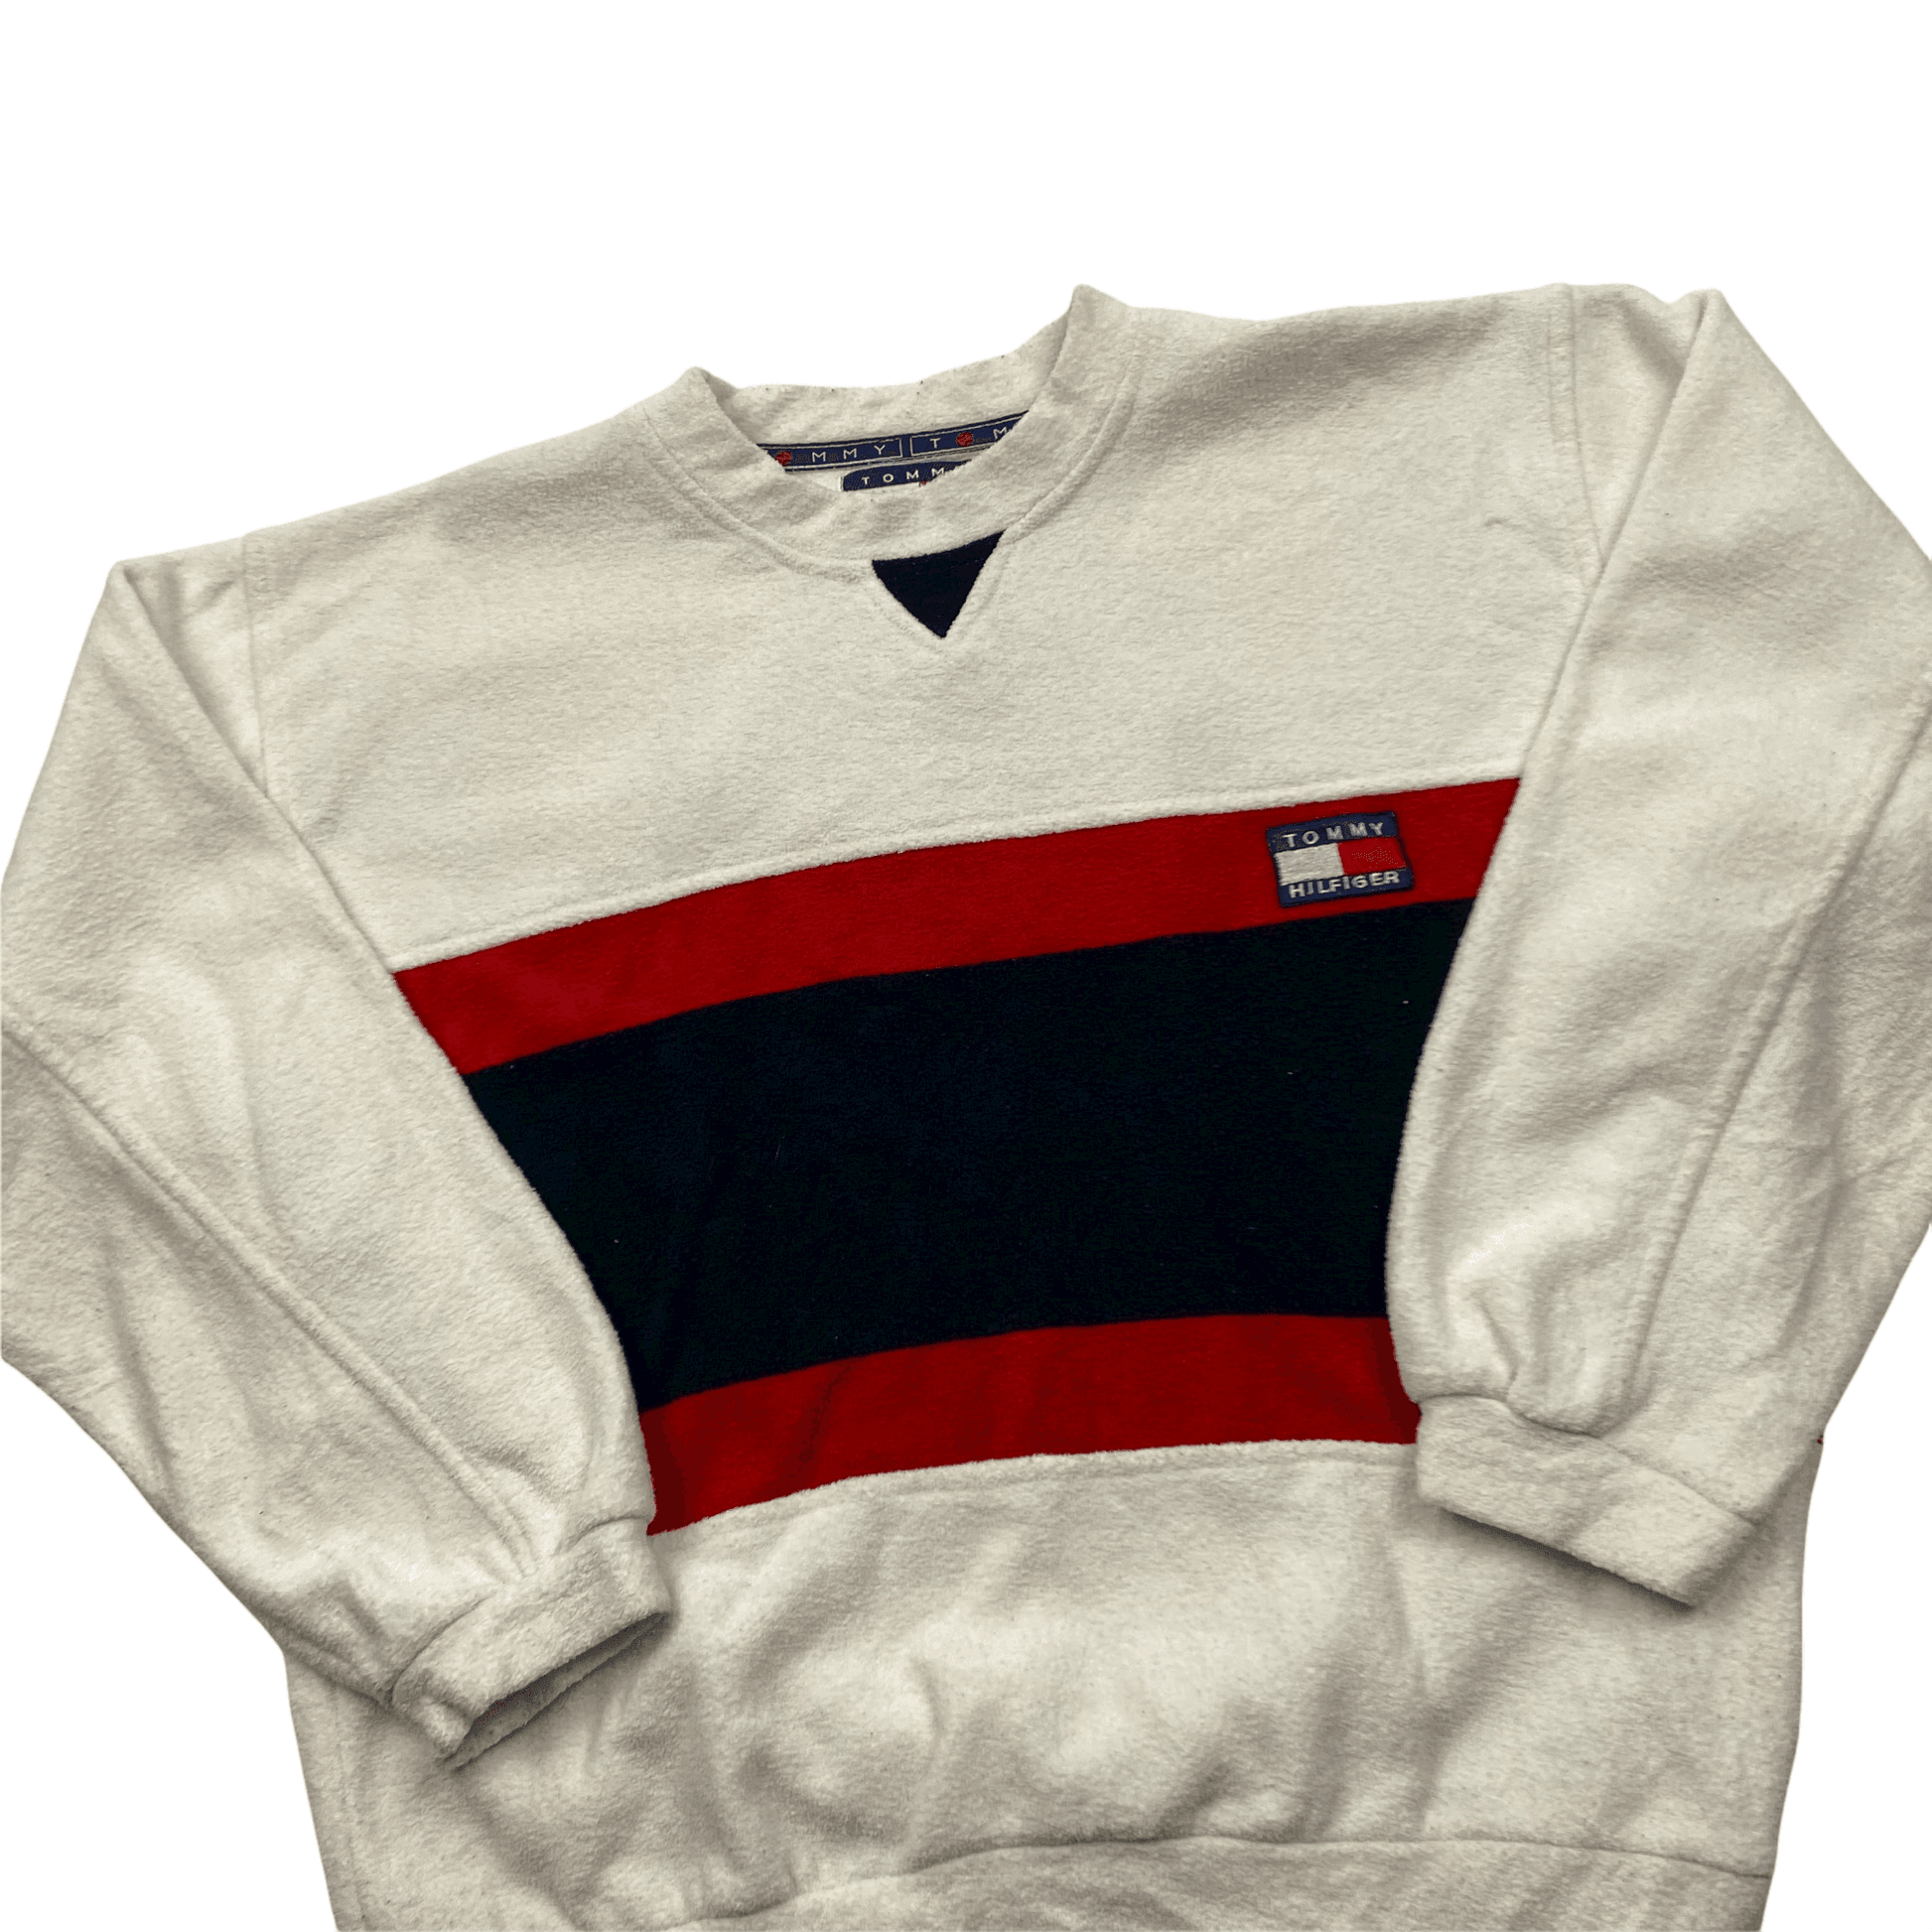 Vintage 90s White, Navy Blue + Red Tommy Hilfiger Spell-Out Fleece Sweatshirt - Small - The Streetwear Studio